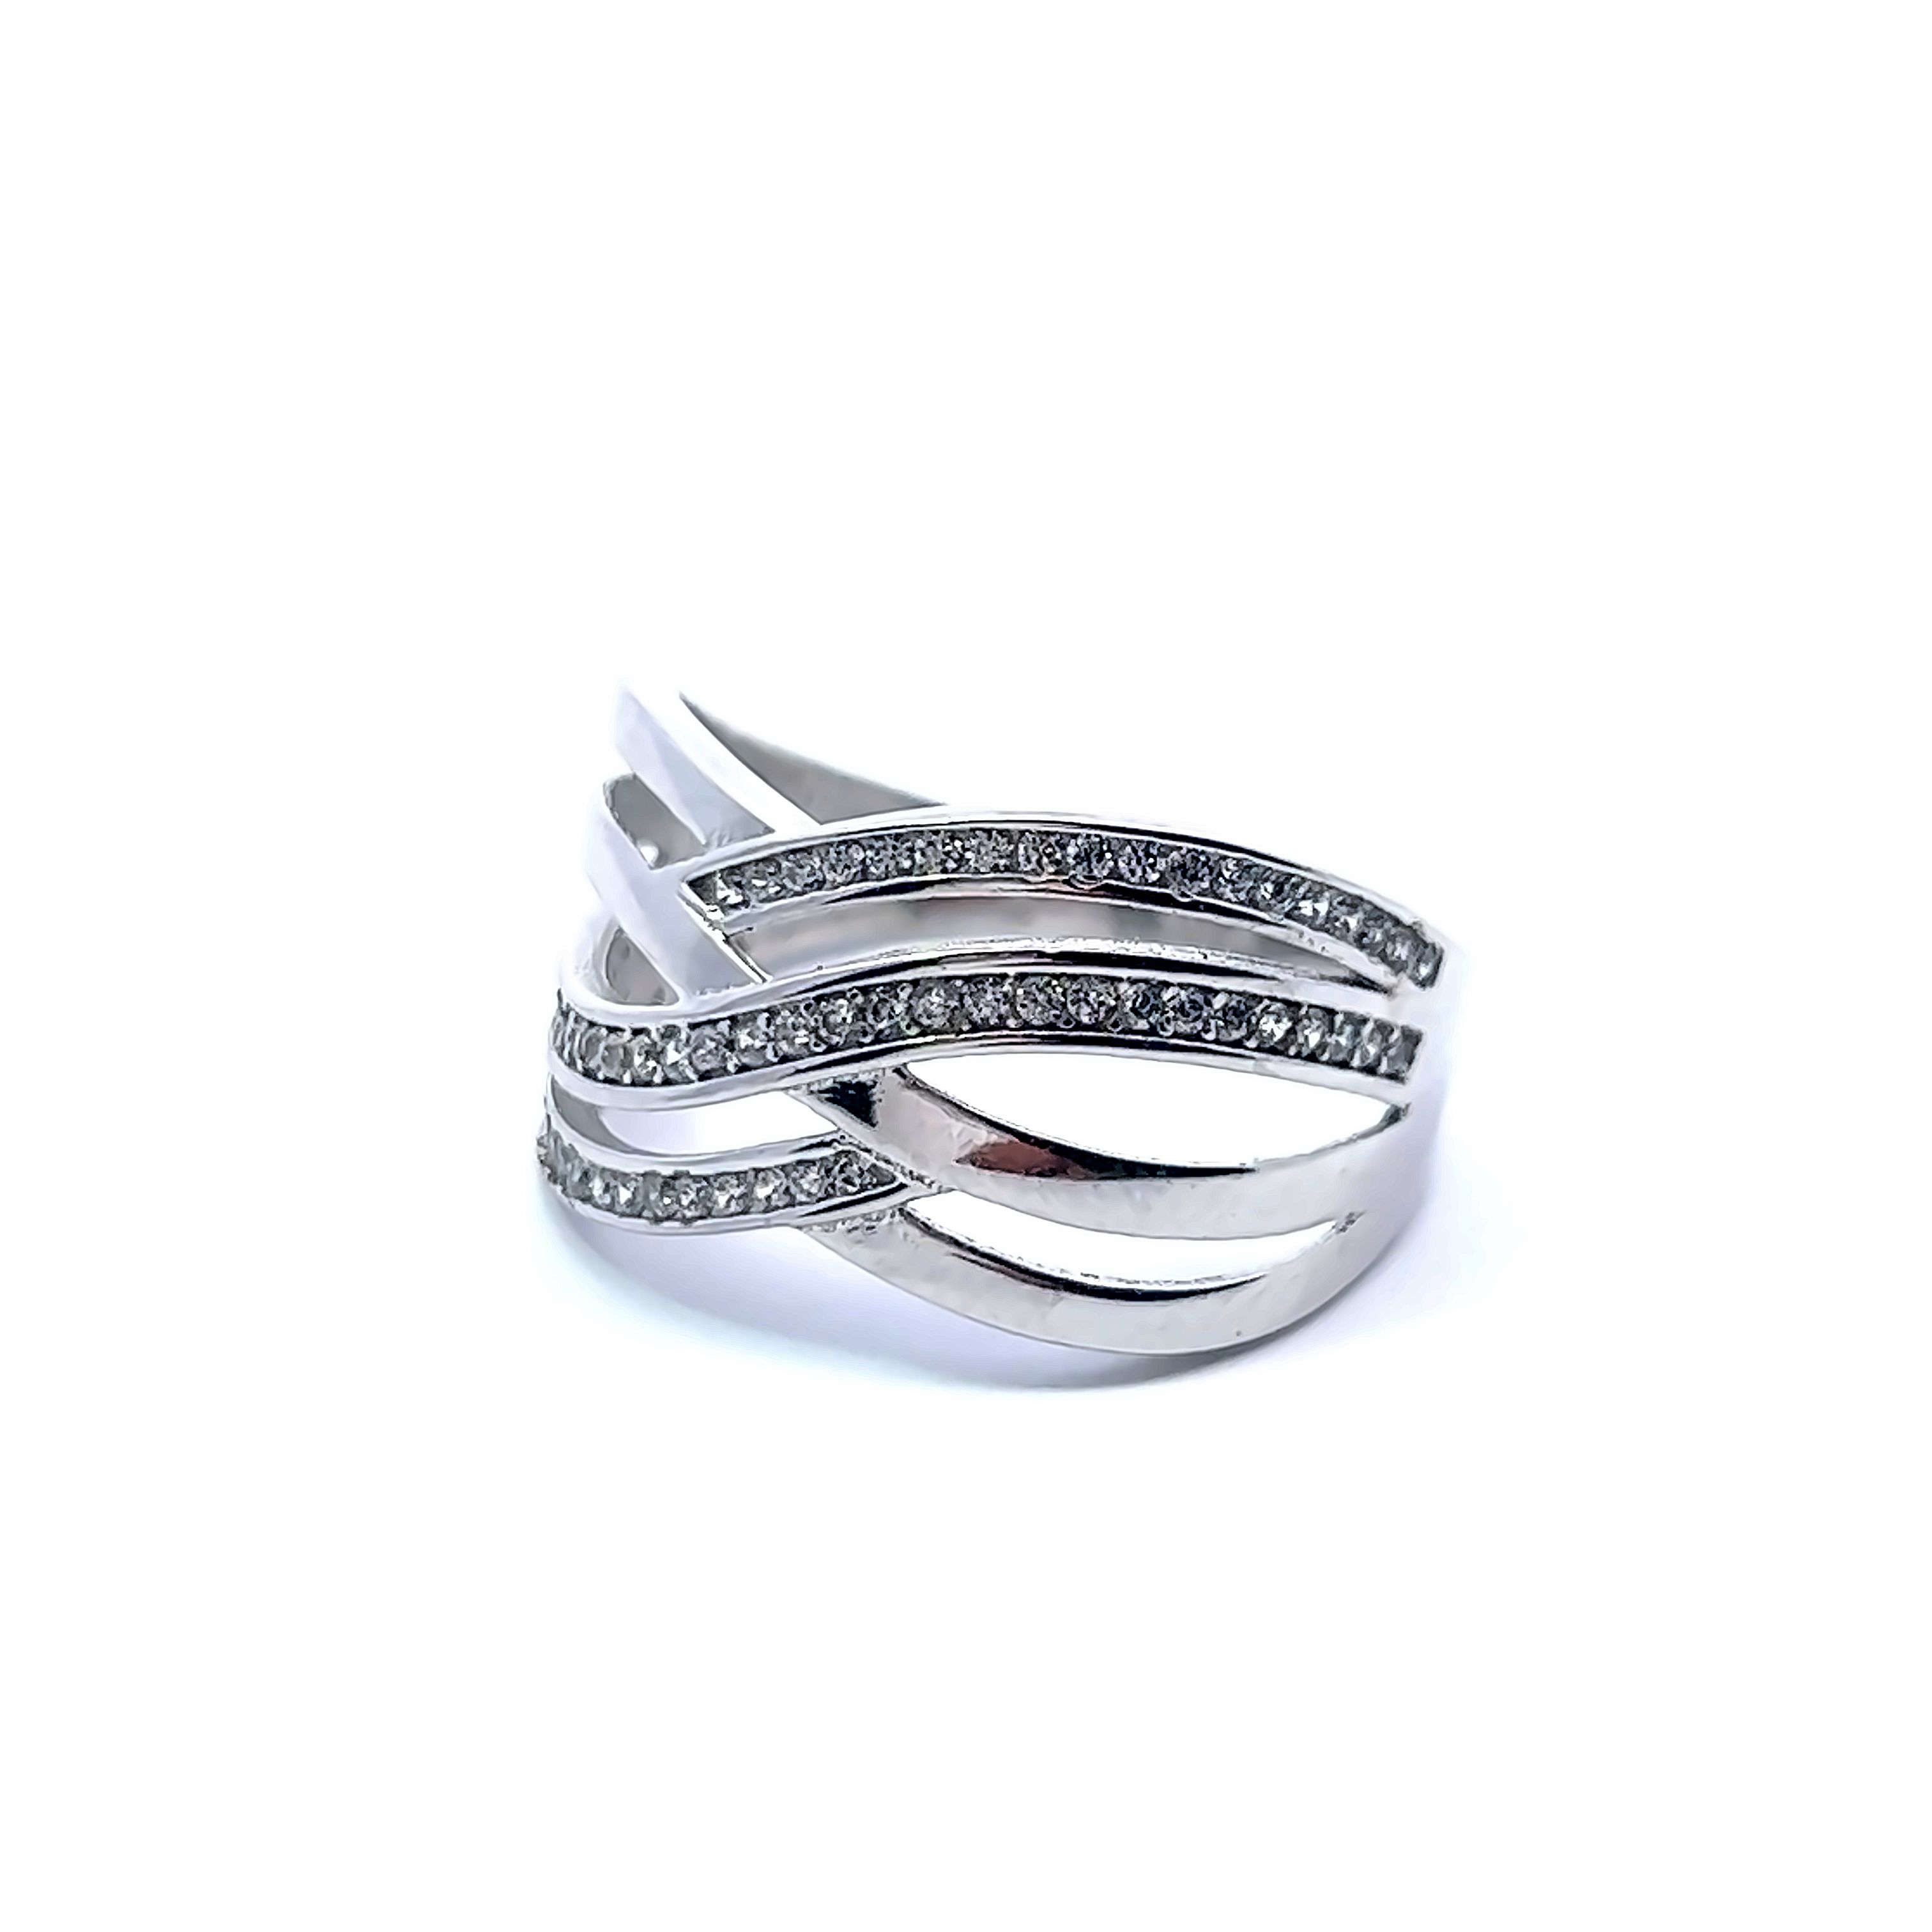 18kt White Gold Ring with Zirconia GUL6160 - Heir & Loom